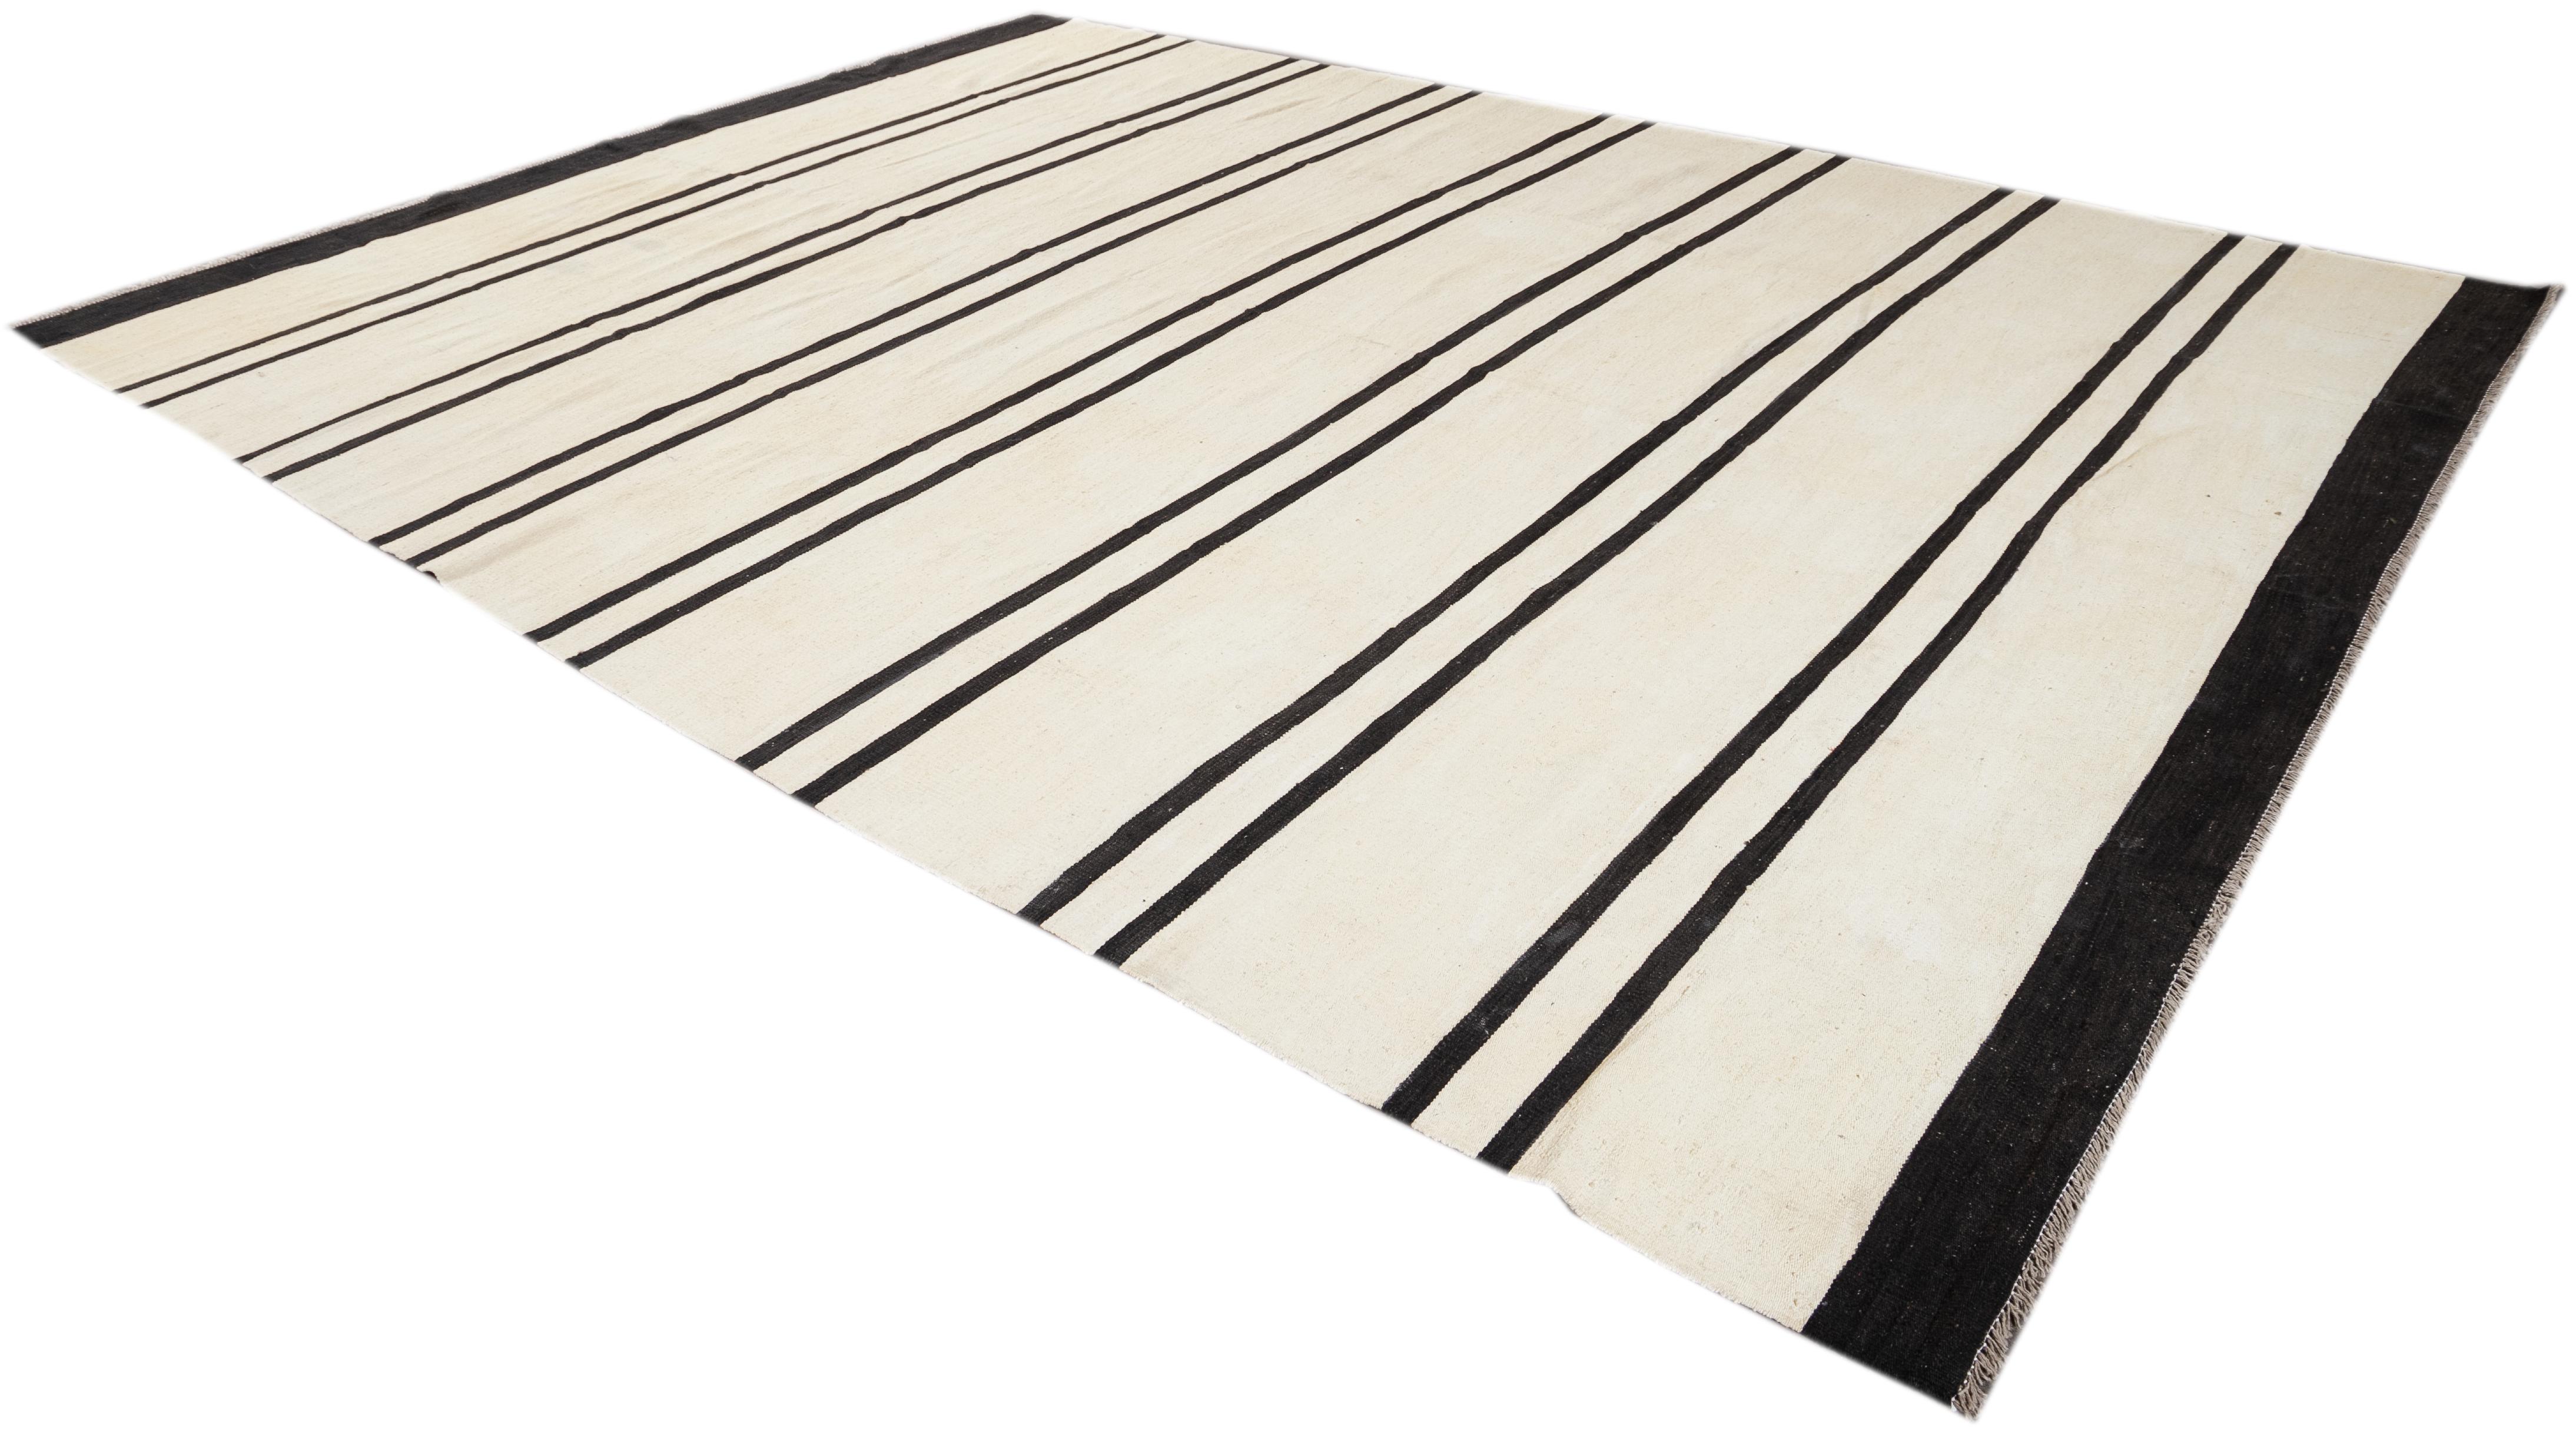 Contemporary Black & White Striped Kilim Flatweave Wool Rug In New Condition For Sale In Norwalk, CT